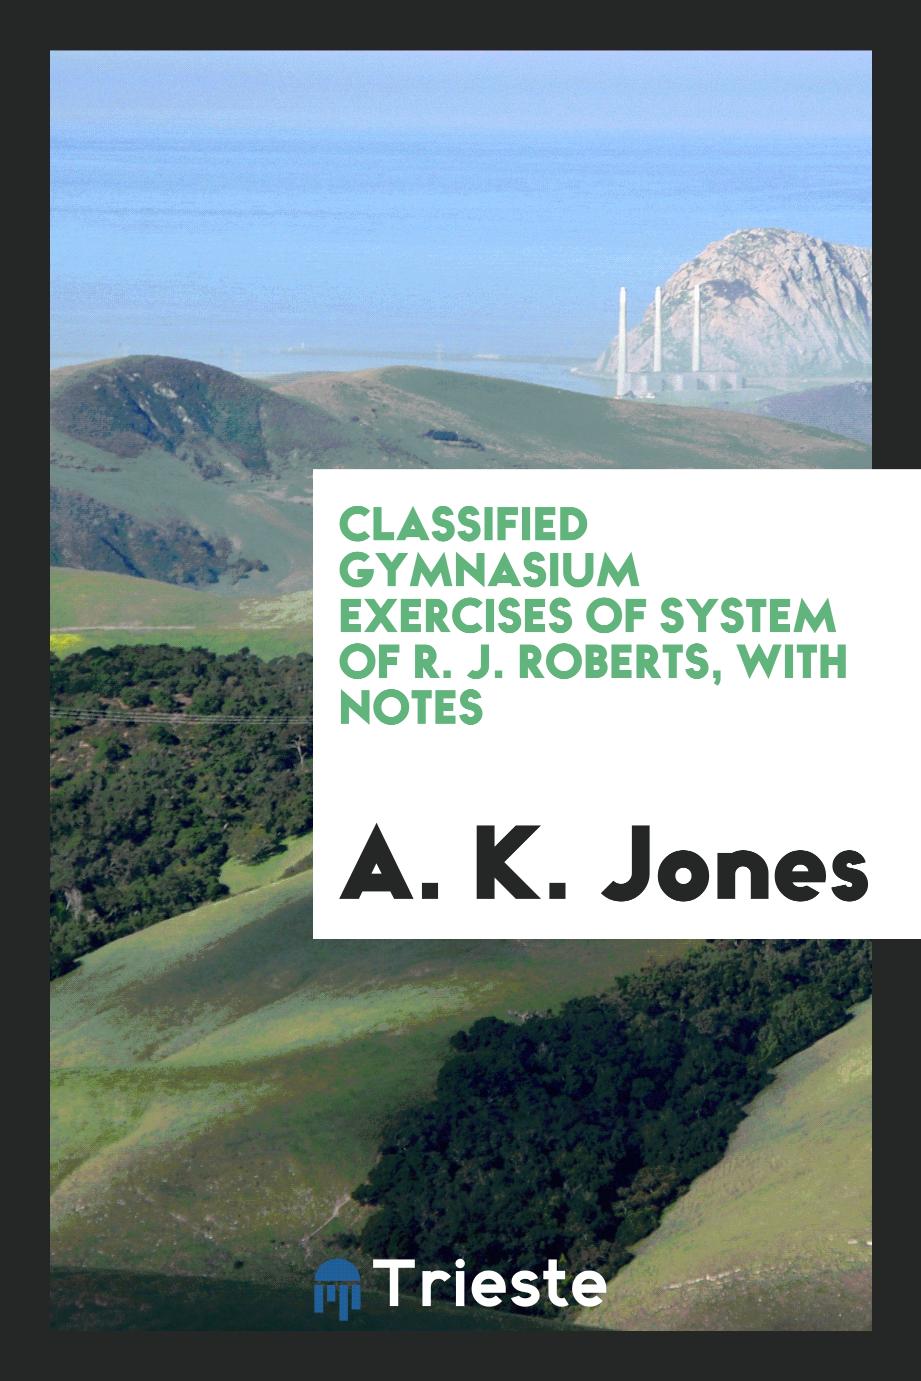 Classified Gymnasium Exercises of System of R. J. Roberts, with Notes